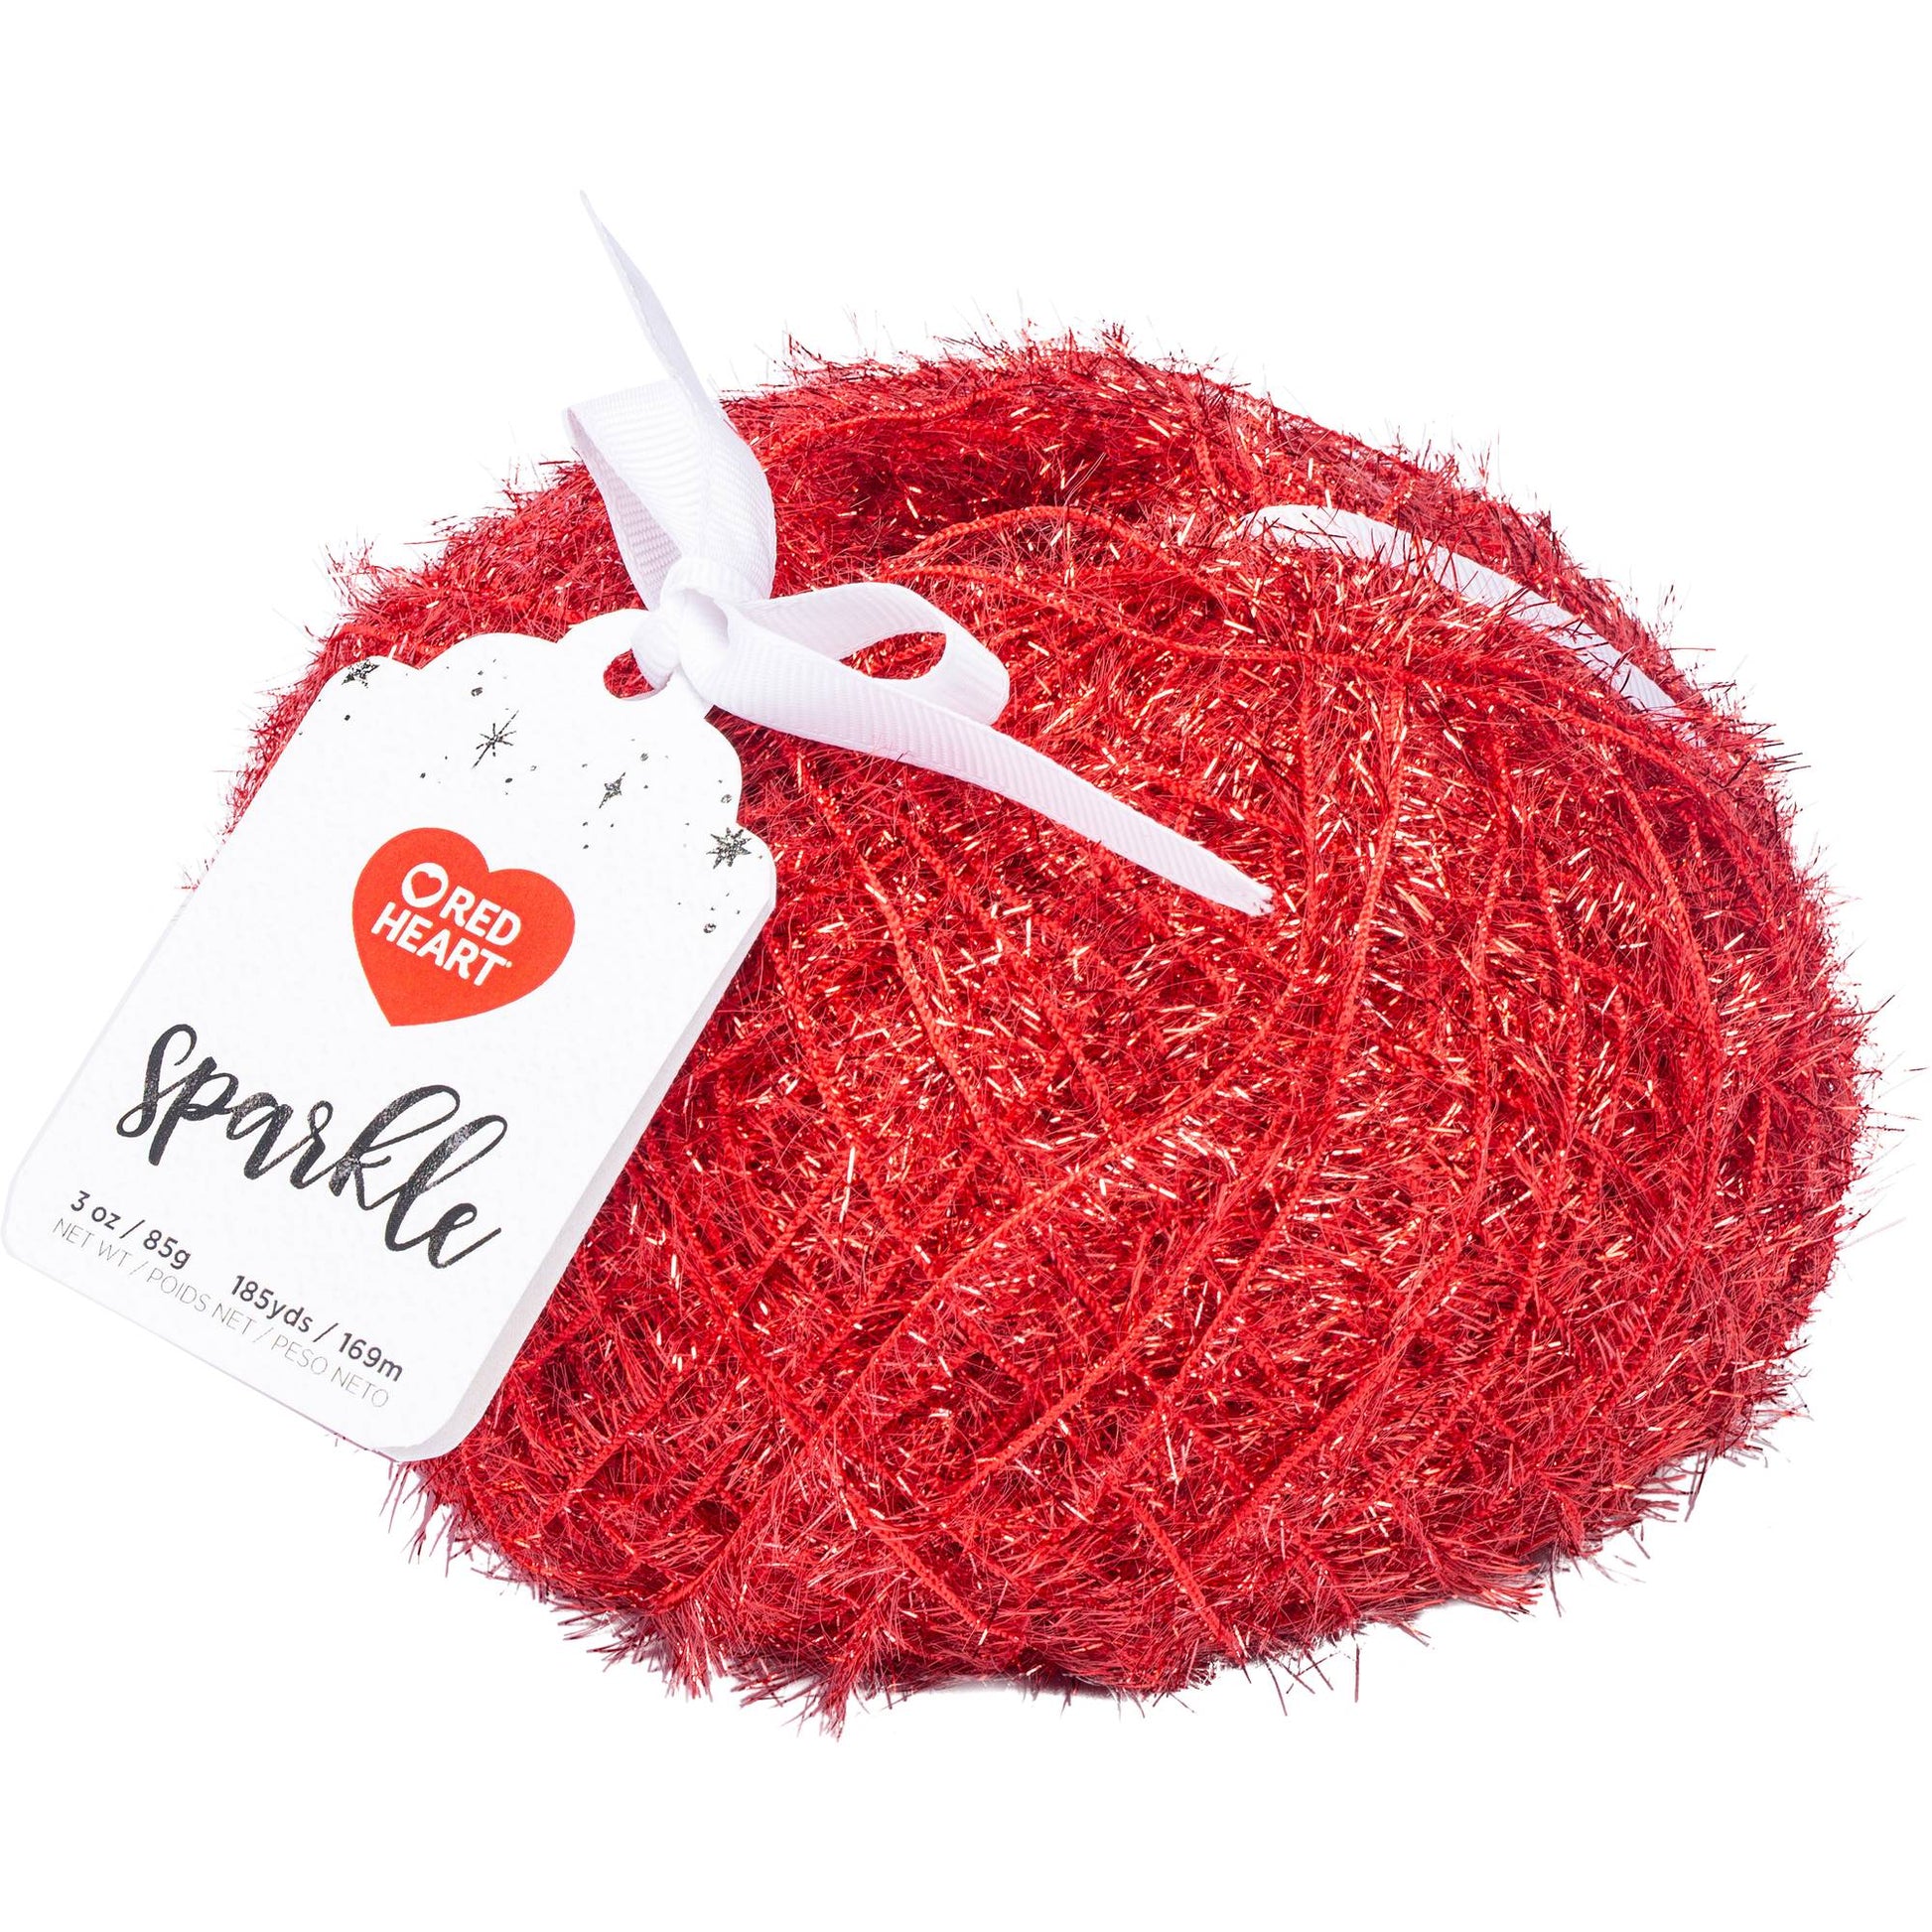 Red Heart Sparkle Yarn - Discontinued shades